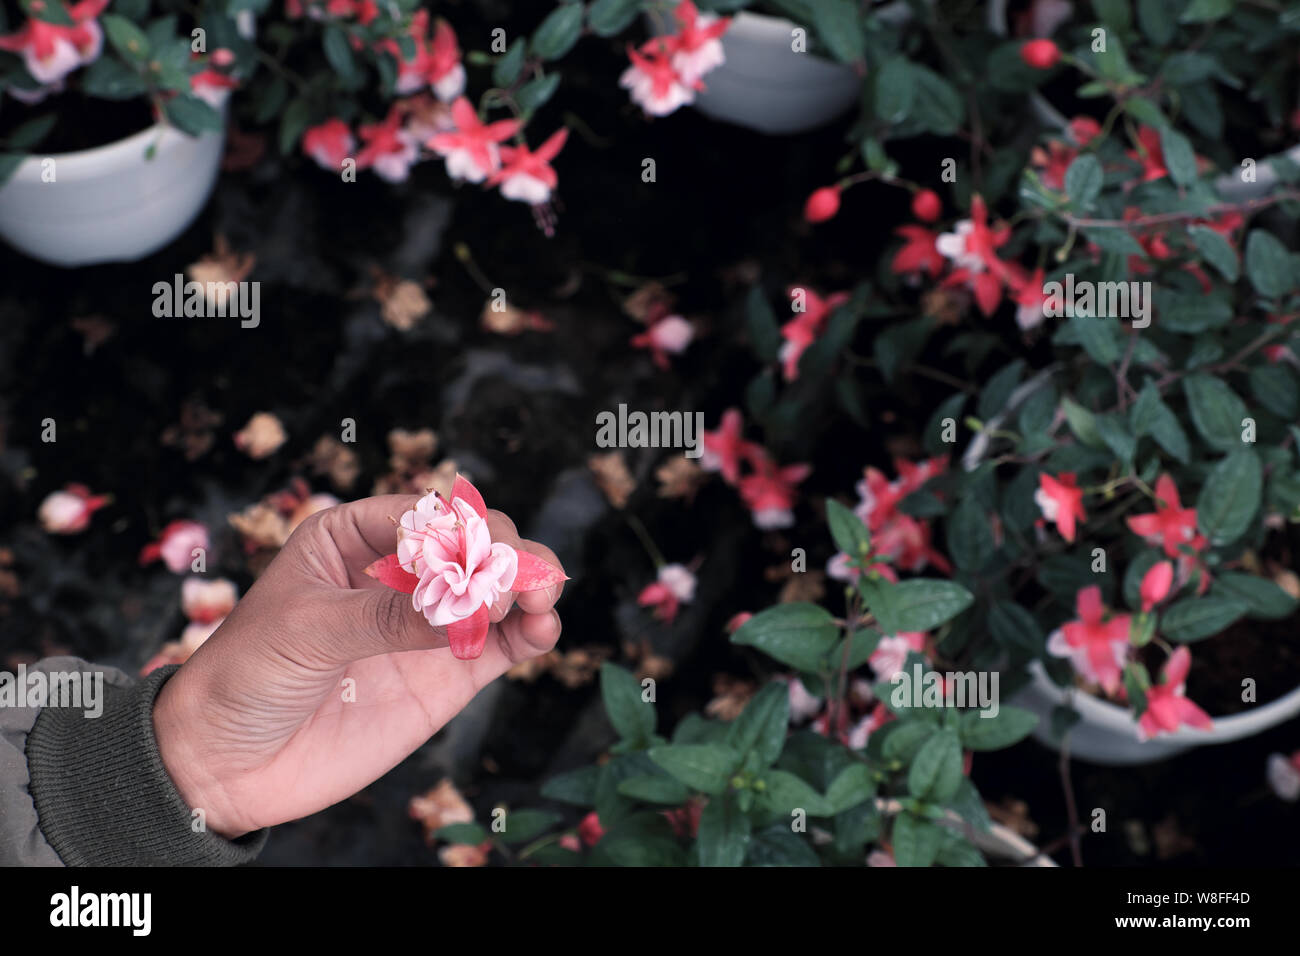 Woman hand pick up pink hardy fuchsia flower that fall from lady 's ear drops plant in ornamental garden Stock Photo